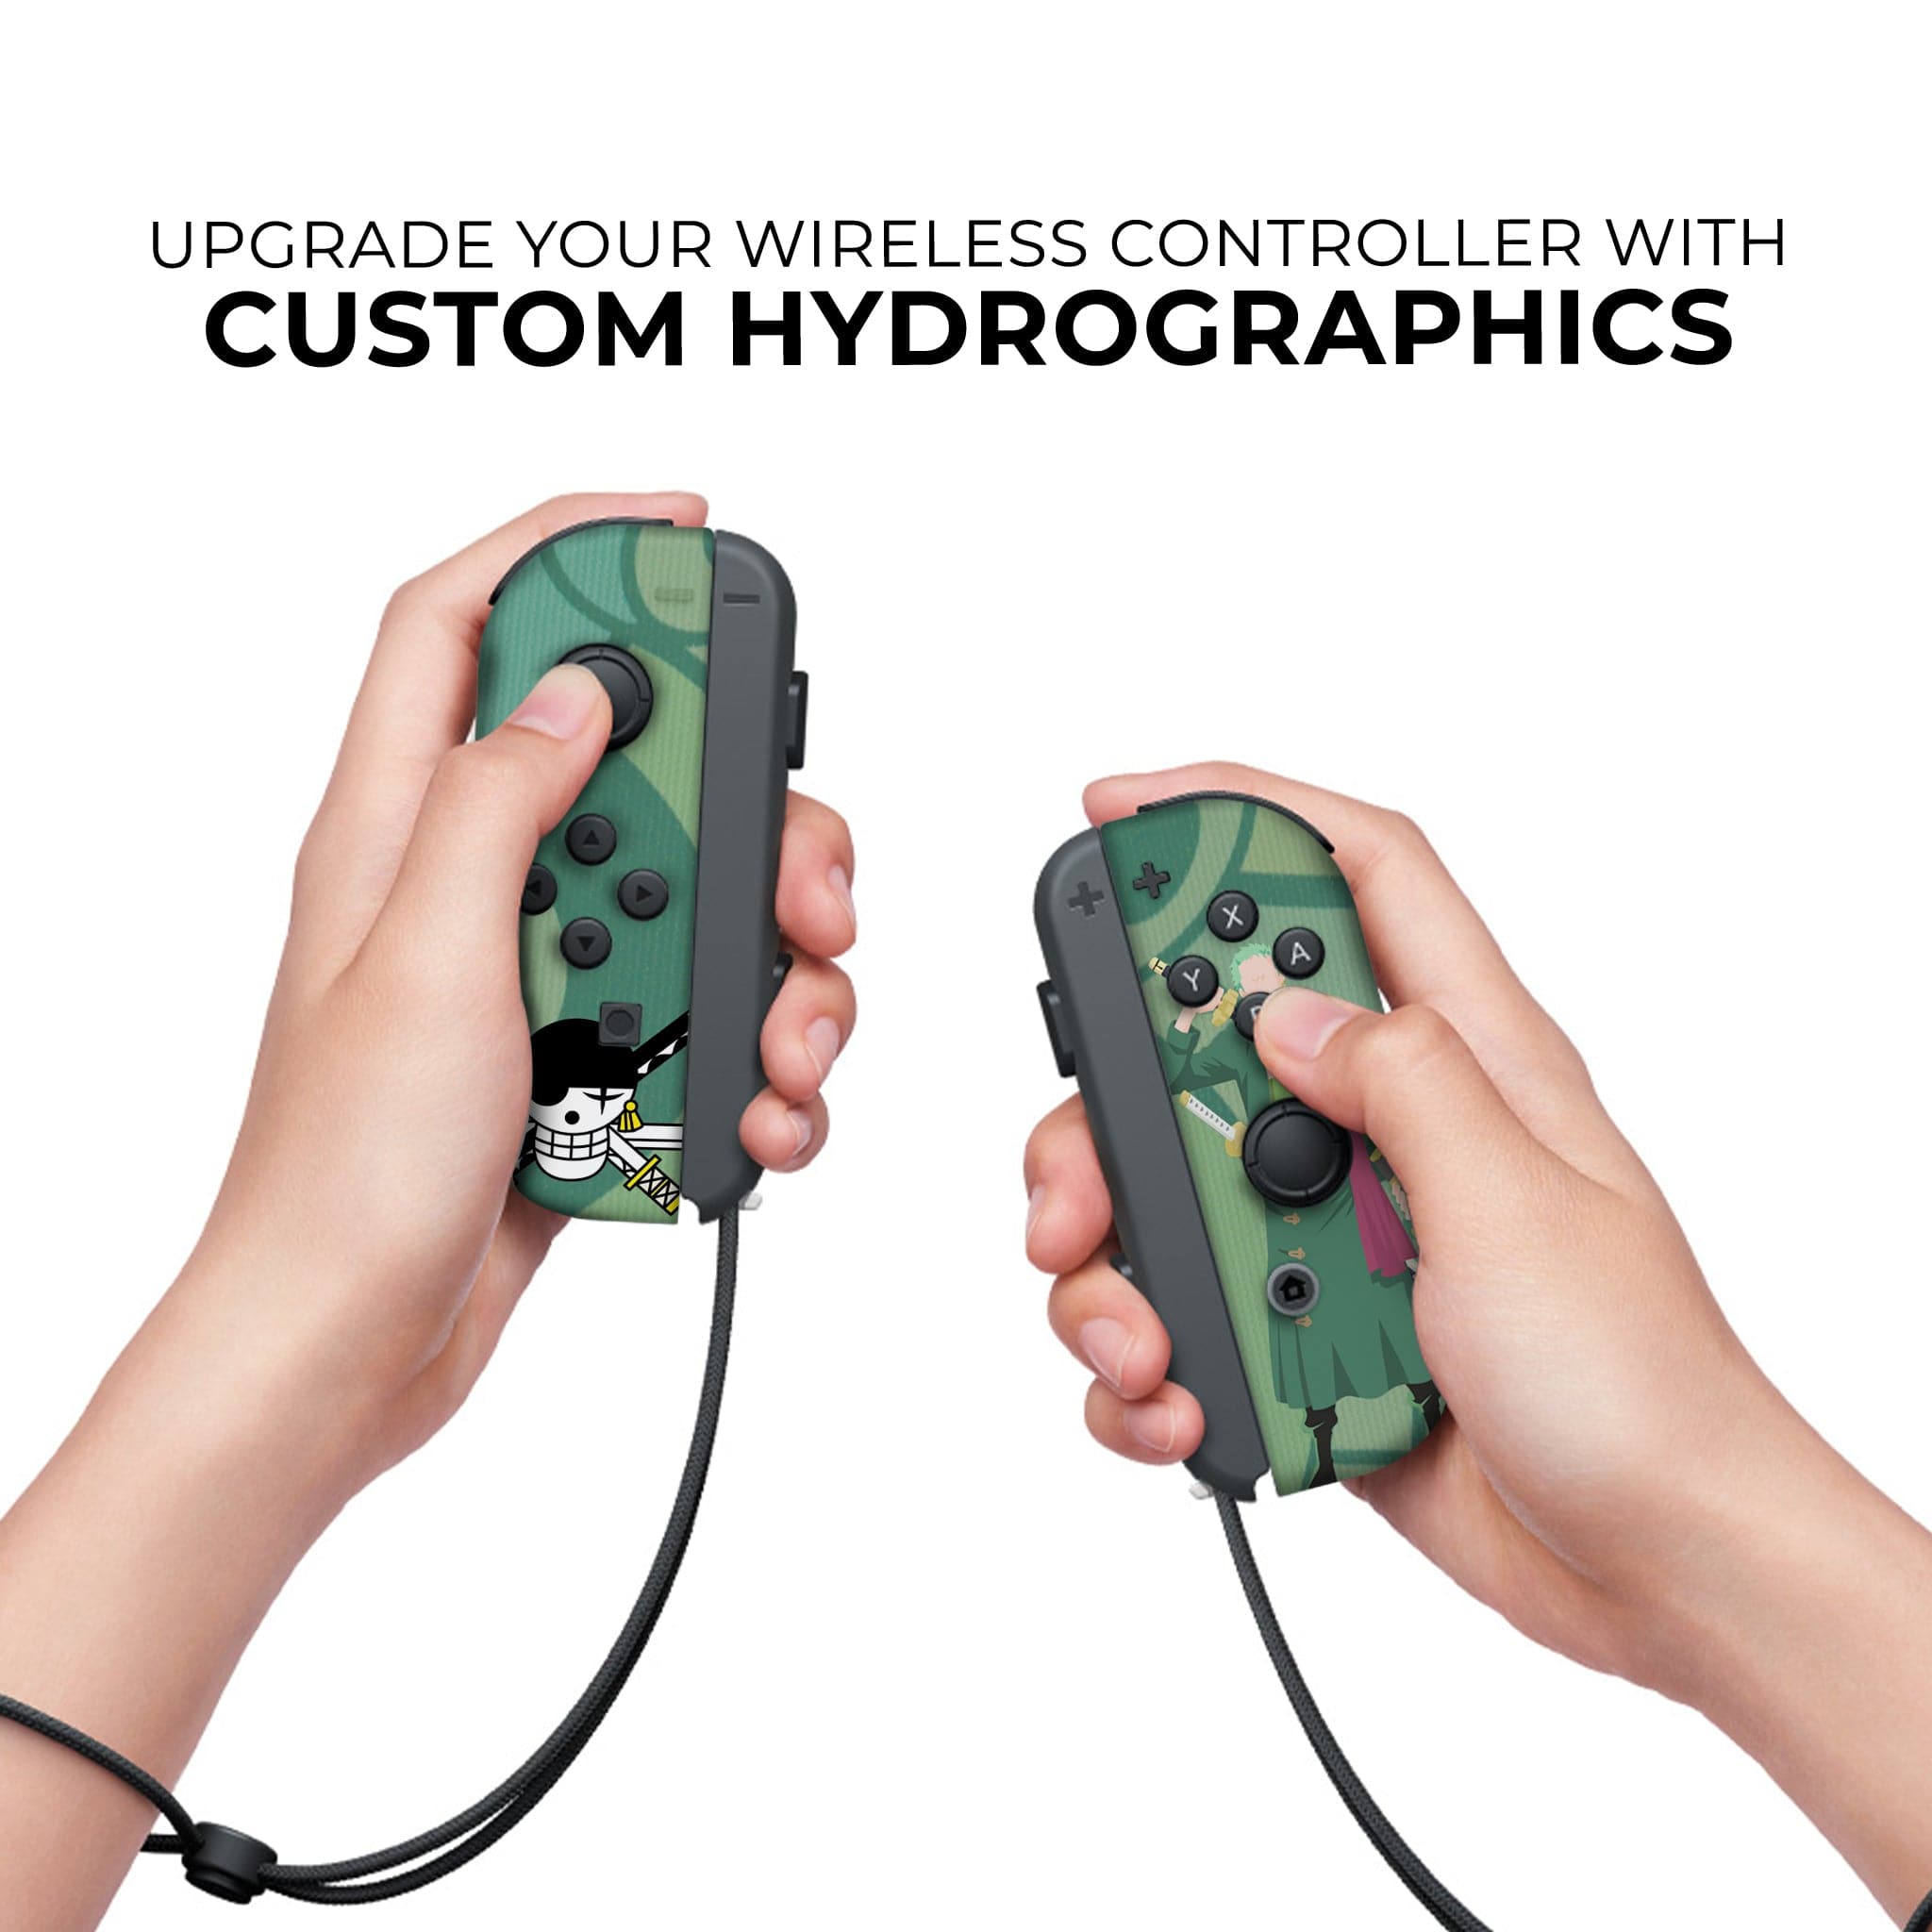 Zoro One Piece Inspired Nintendo Switch Joy-Con Left and Right Switch Controllers by Nintendo